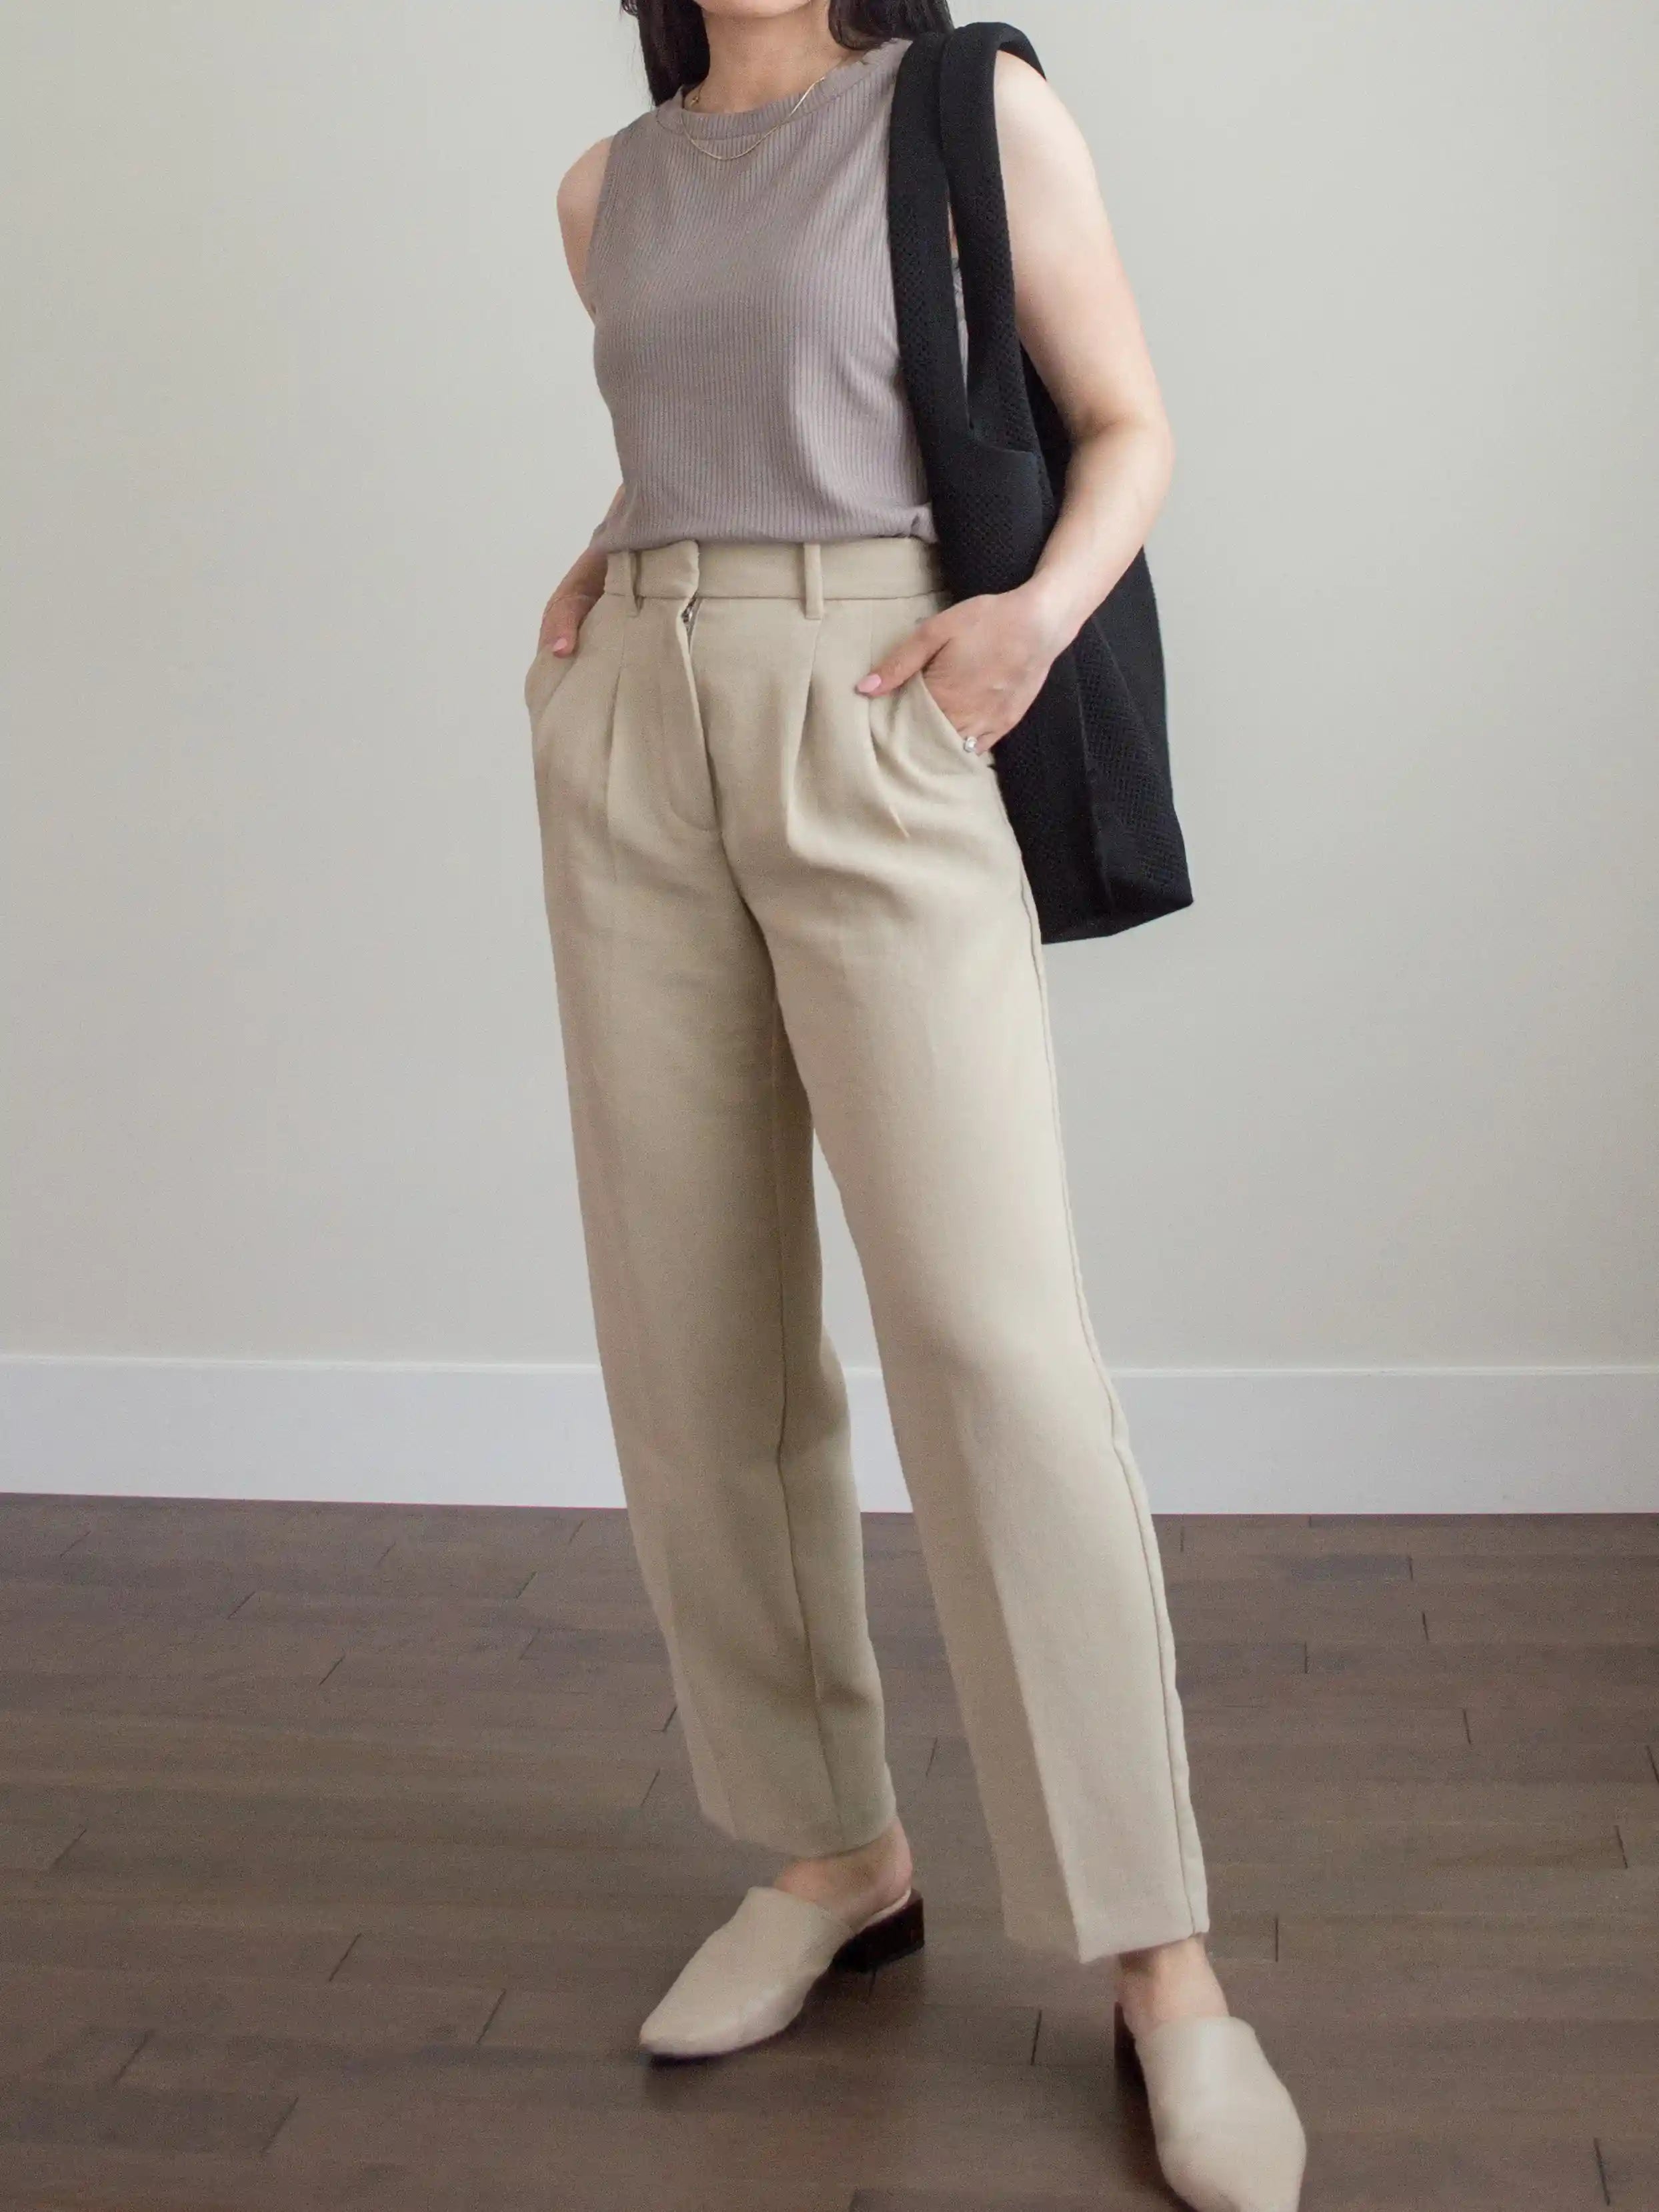 Elegant High-Waisted Beige Trousers: Stylish Office Fashion  Women high  waist pants, Casual office attire, High waisted pants